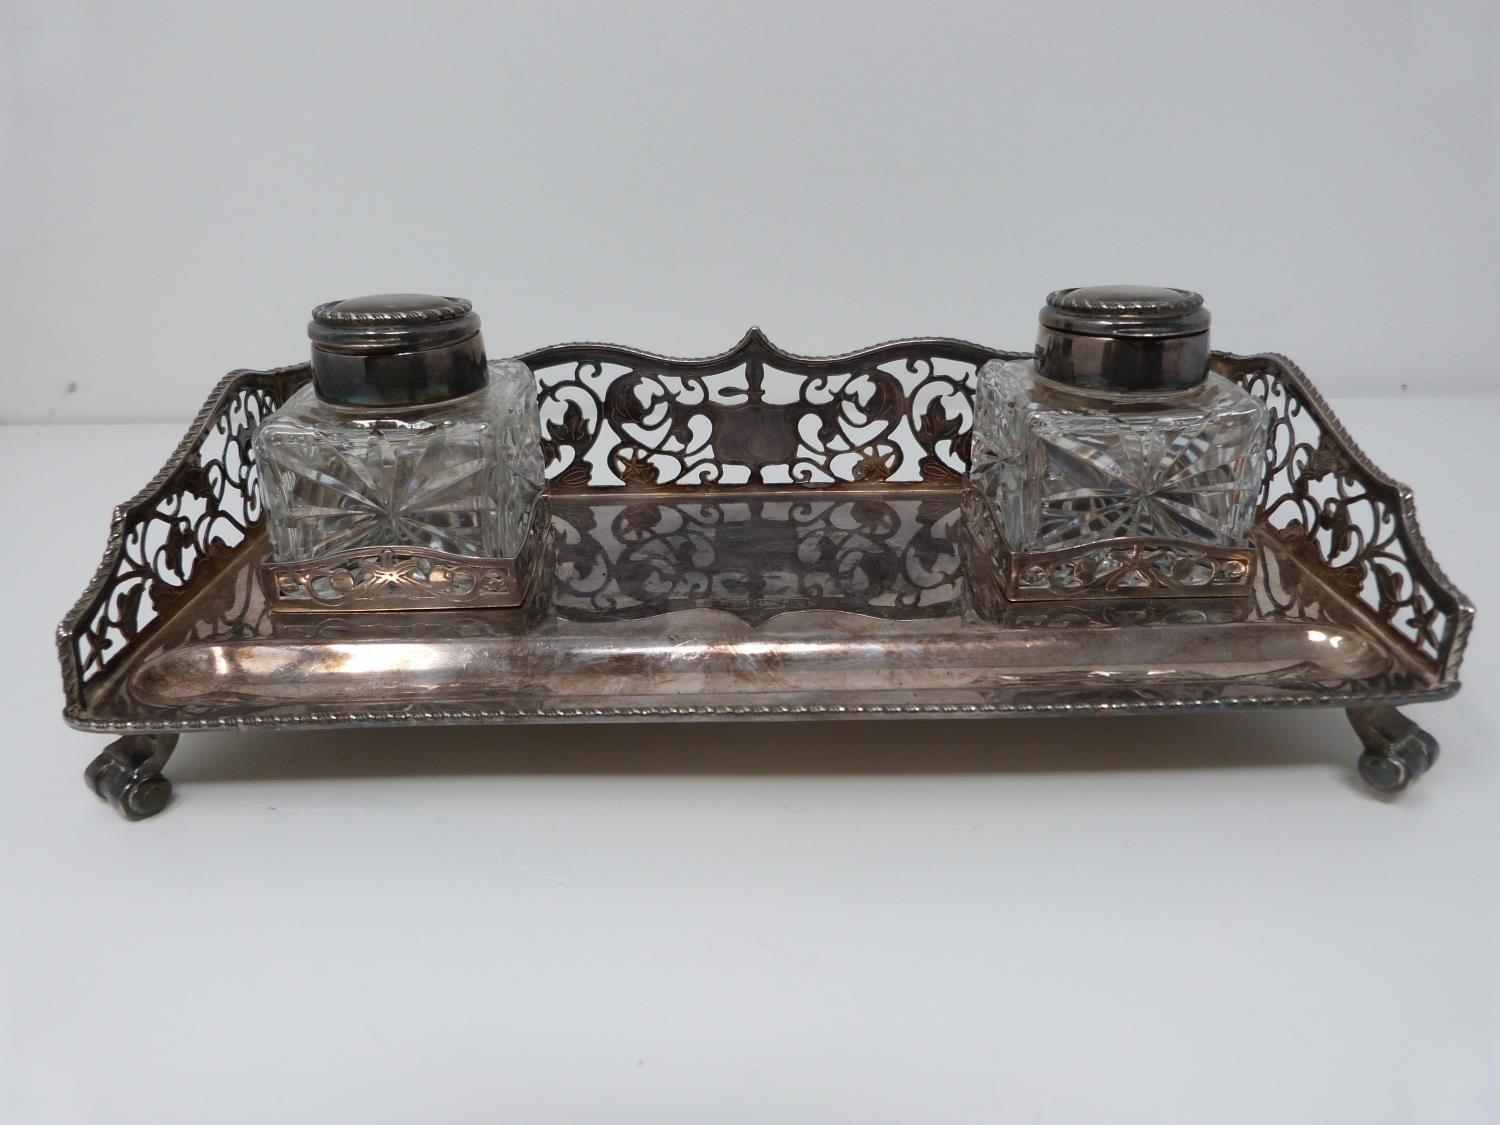 A silver and glass piercework desk inkwell, two bottles with silver tops and rope edging. Ink